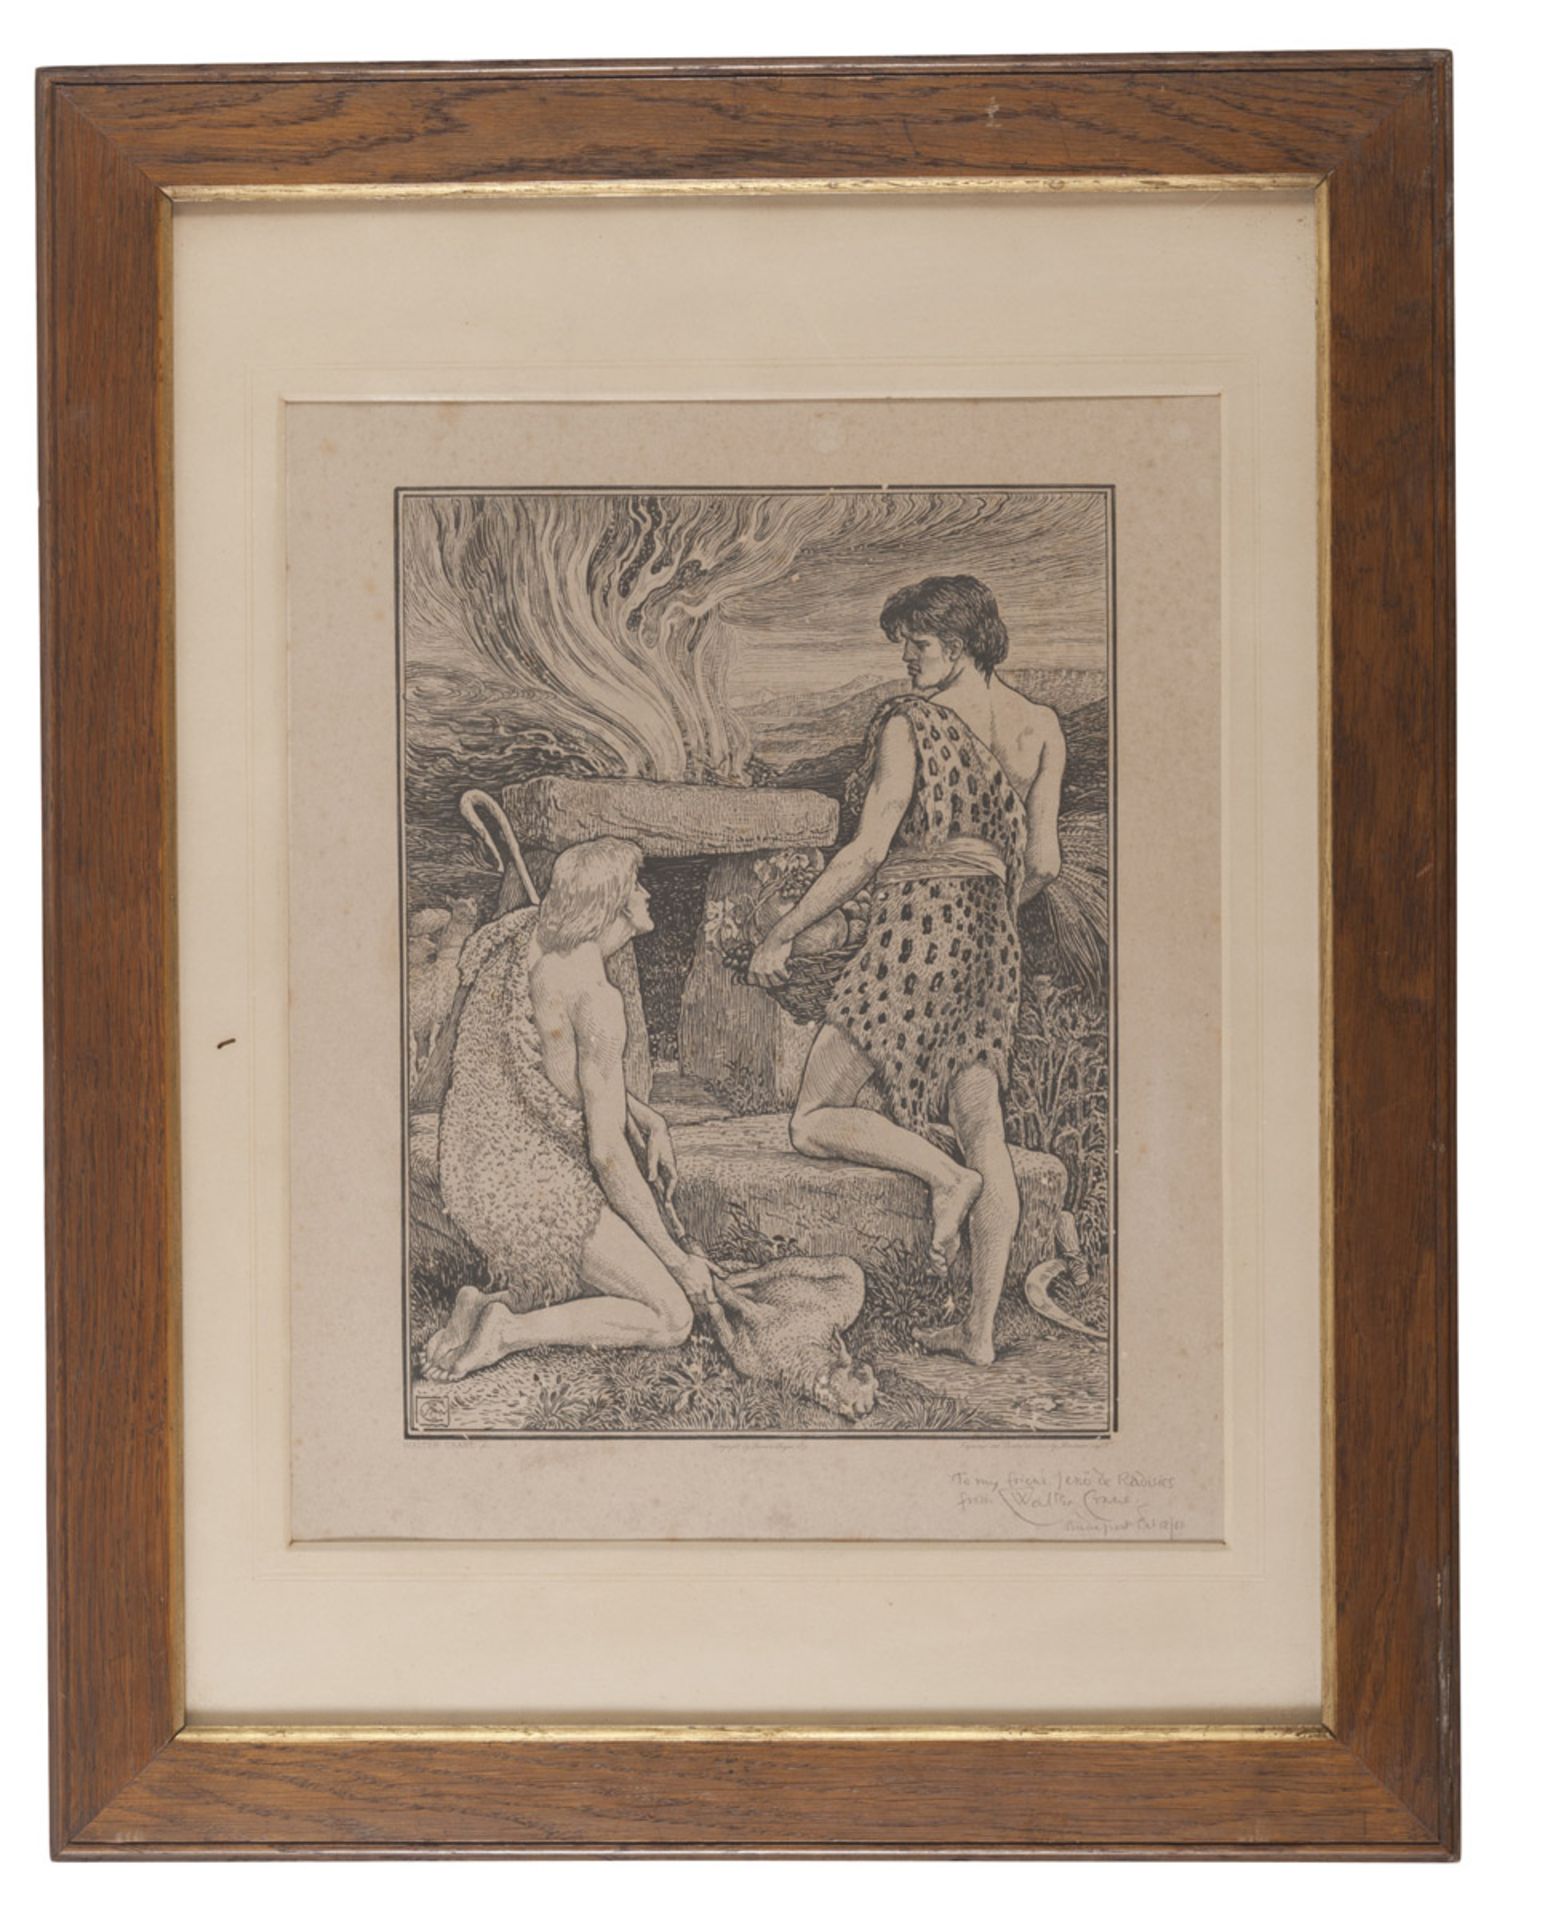 ENGRAVER EARLY 20TH CENTURY CAIN AND ABEL, AFTER WALTER CRANE Monochrome lithograph, cm. 34 x 27